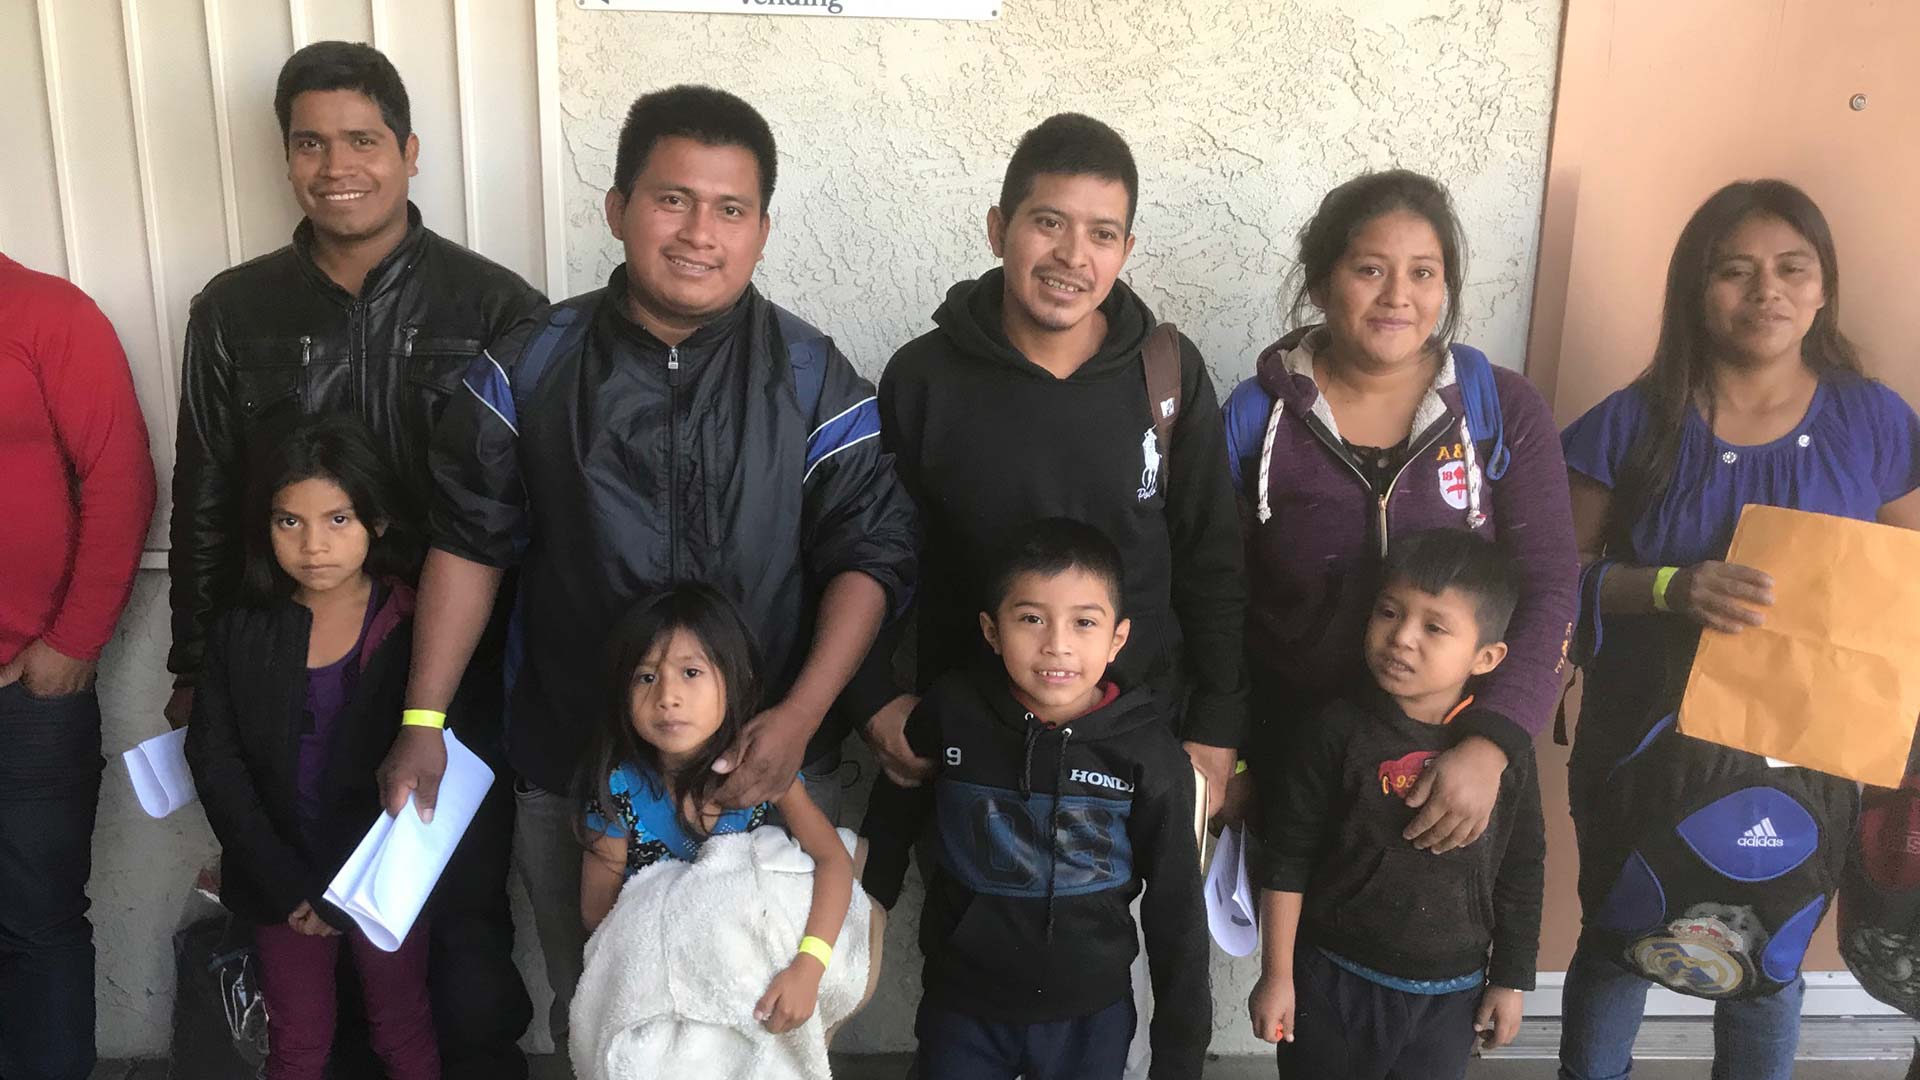 Four families from Guatemala with small children waiting for shelter and something to eat.  Tucson volunteers are helping them get to their final destinations to await asylum hearings, Dec. 23, 2018.